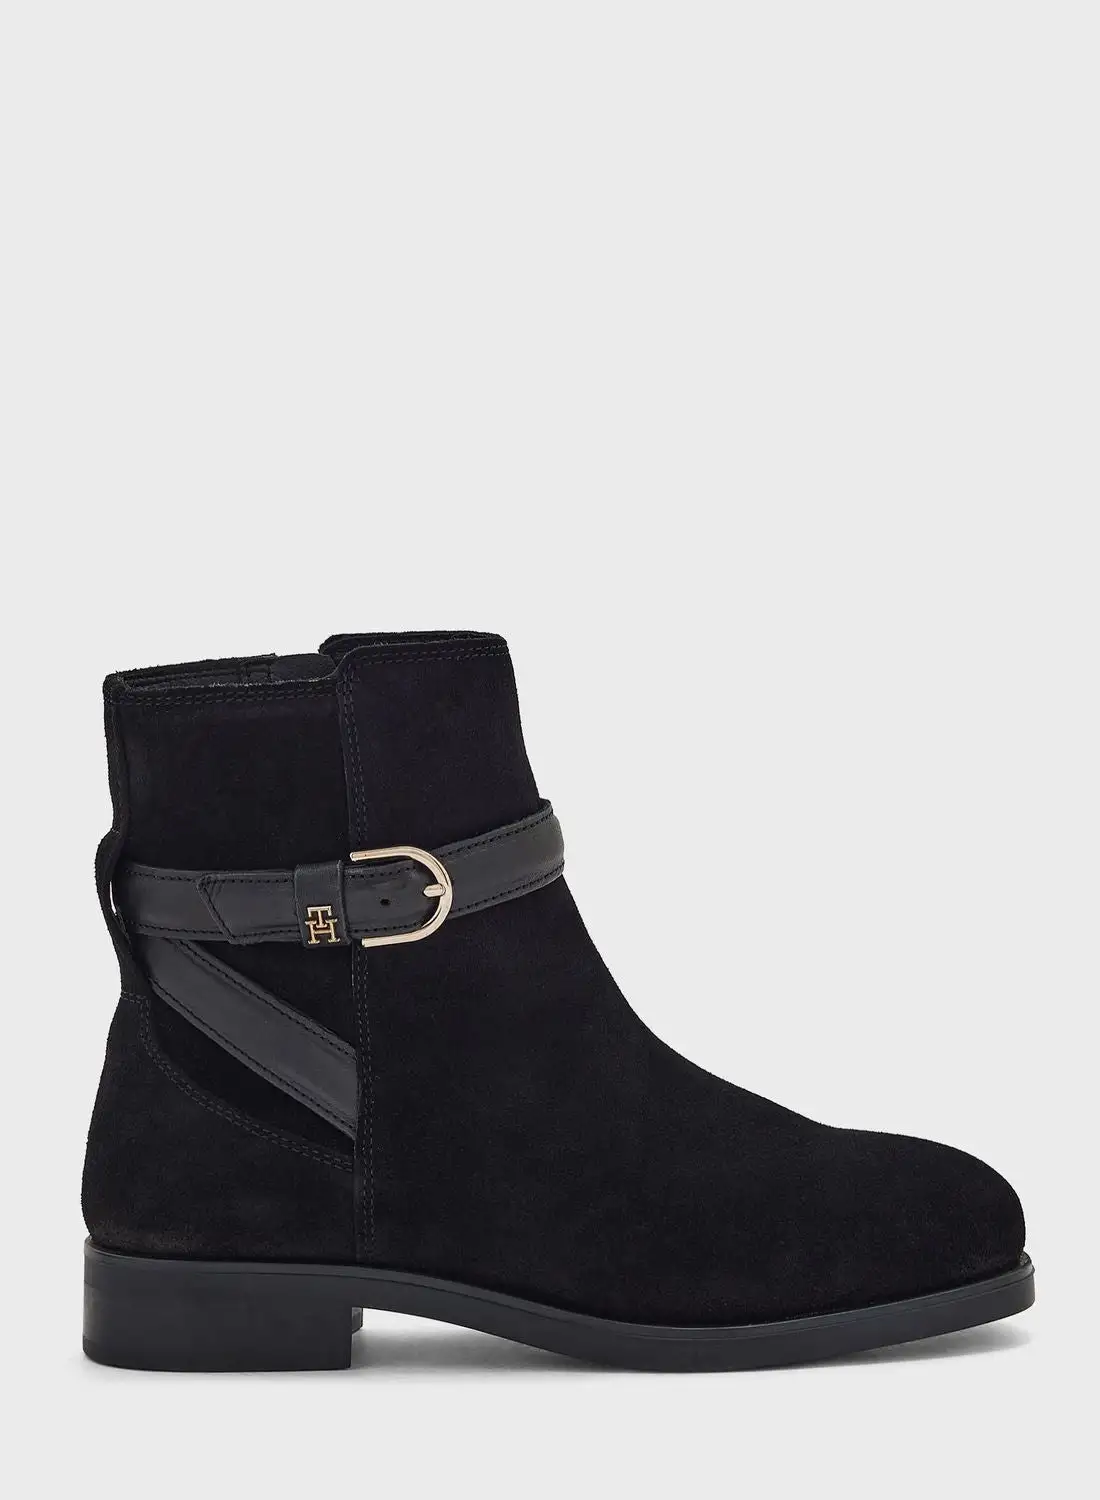 TOMMY HILFIGER Essential Buckle Suede Boots